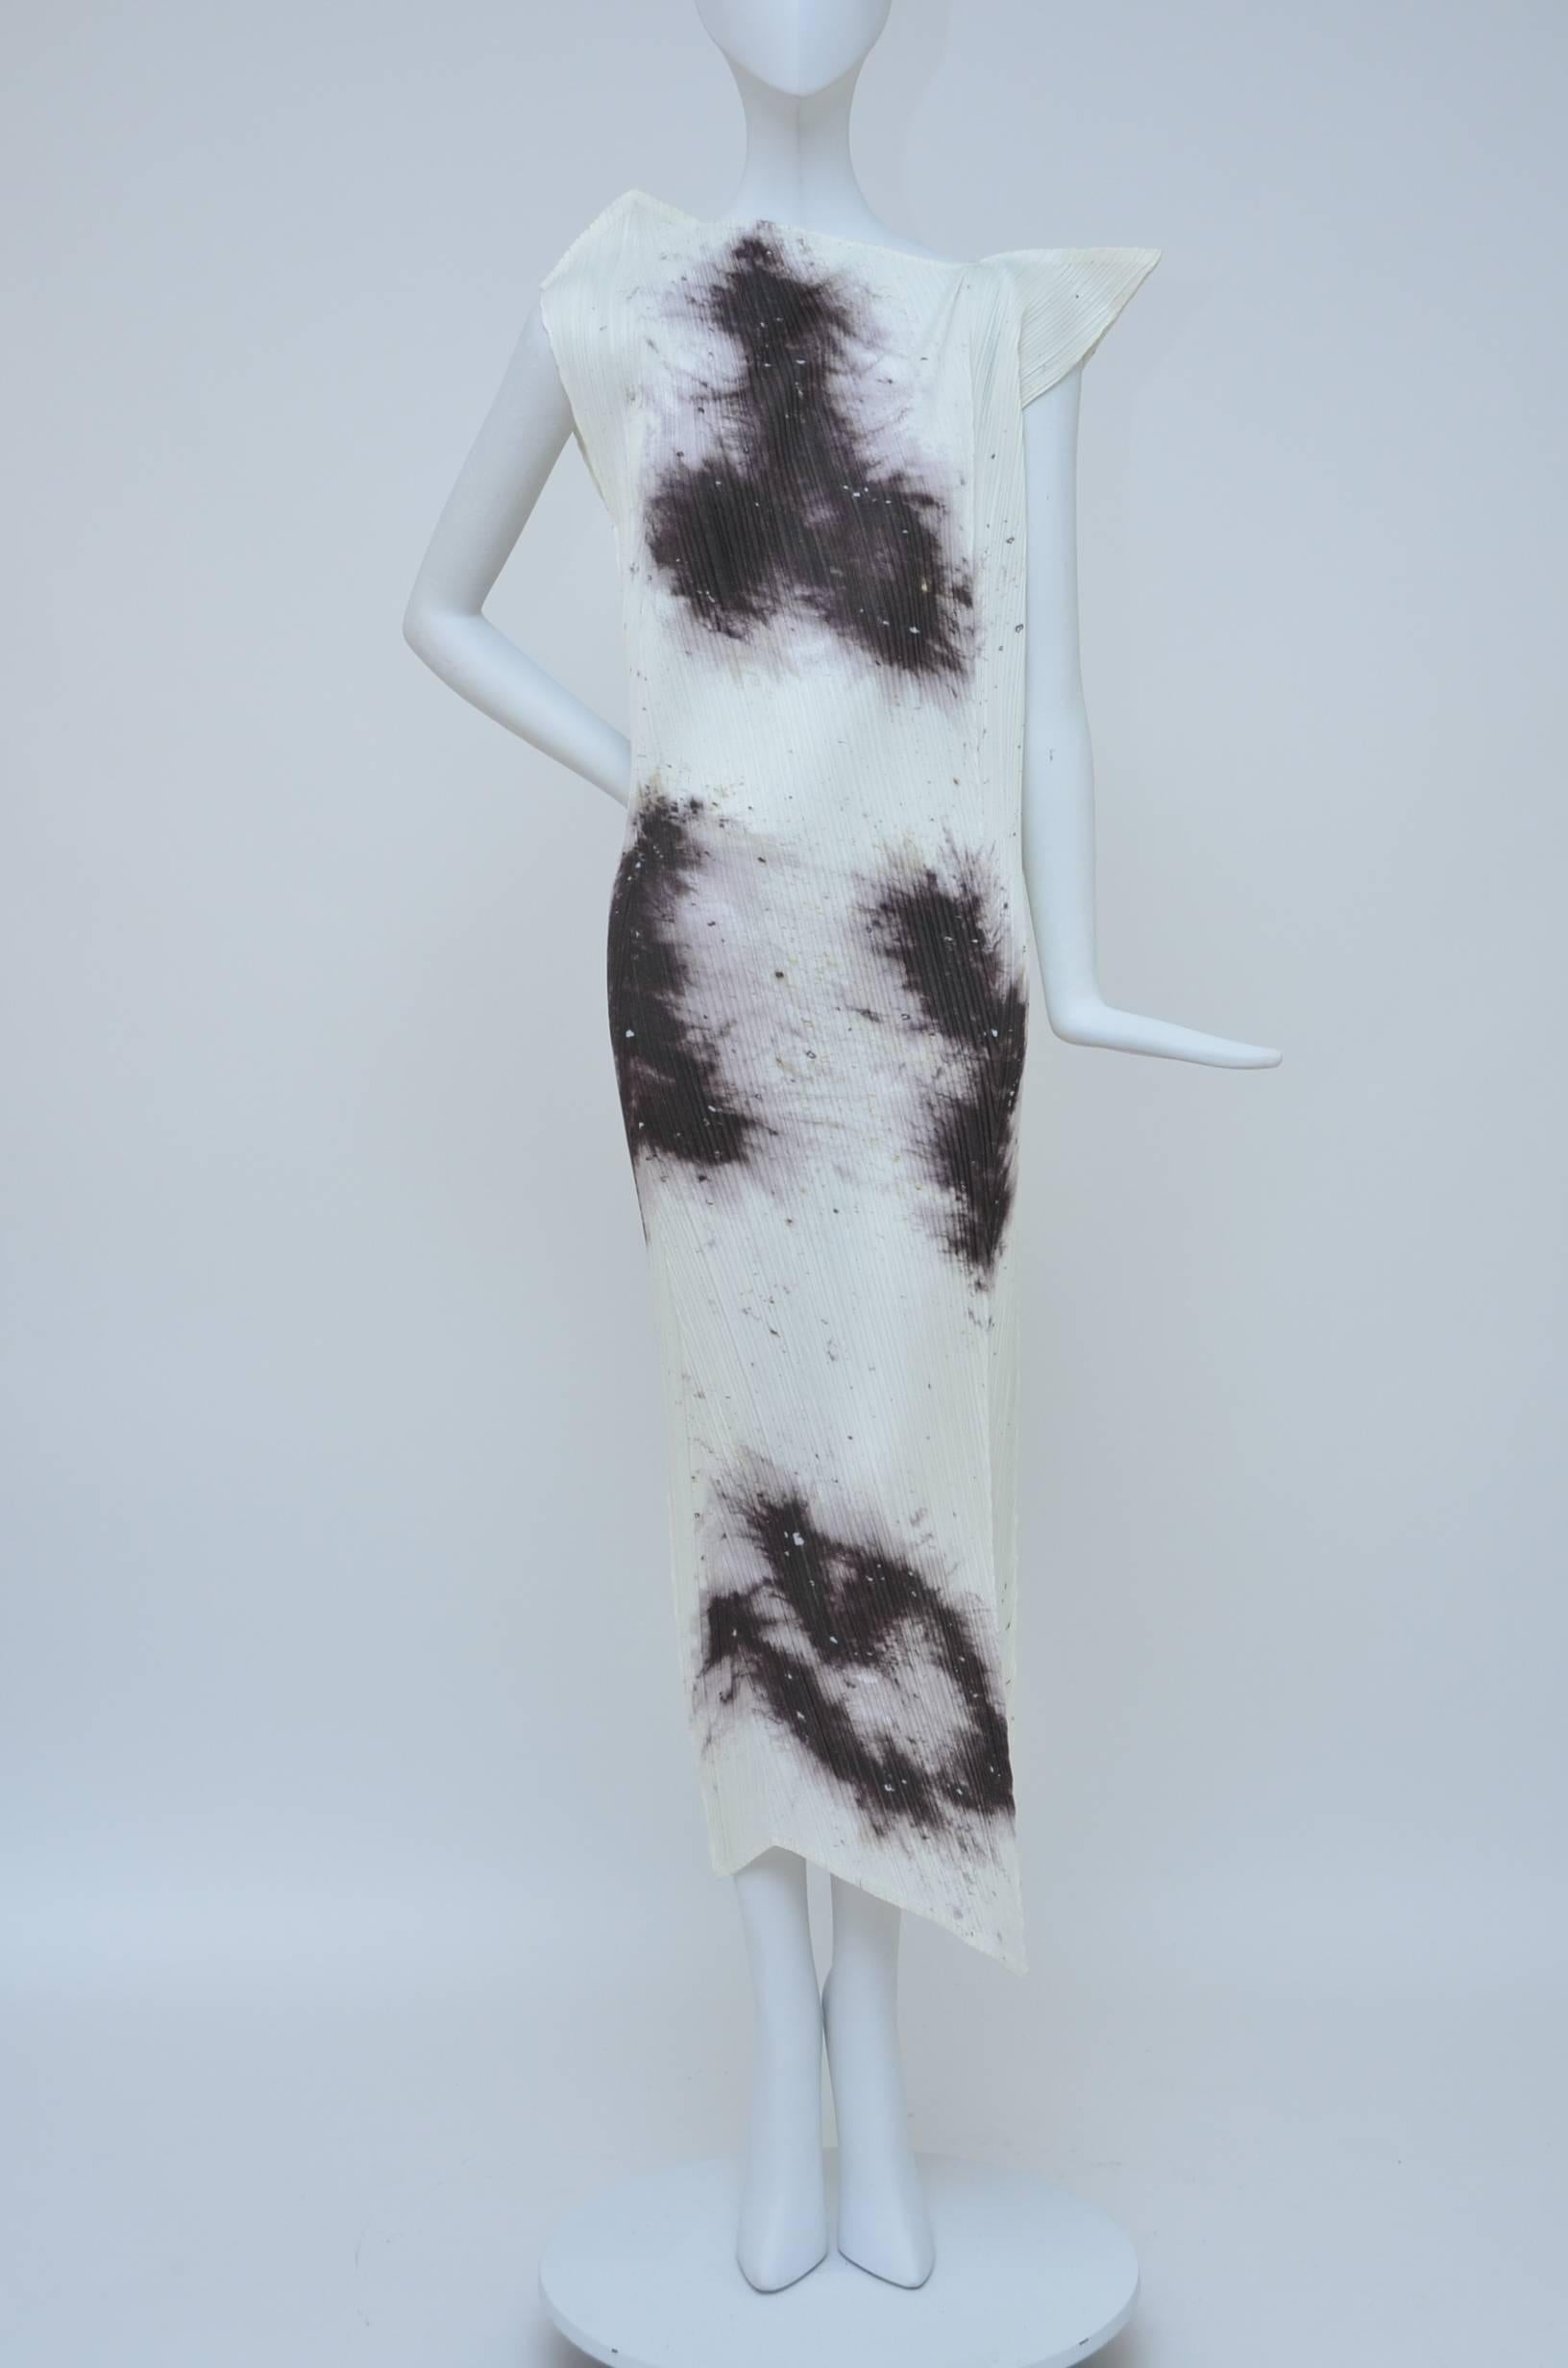 Issey Miyake/Cai Guo-Qiang printed 'gunpowder' dress.
Guest Artist, Series #4. Size 3.
Pleated polyester fabric  with abstract gunpowder trail print to front and back, asymmetric neckline with points to shoulder and hem.
Approx. measurements :Bust